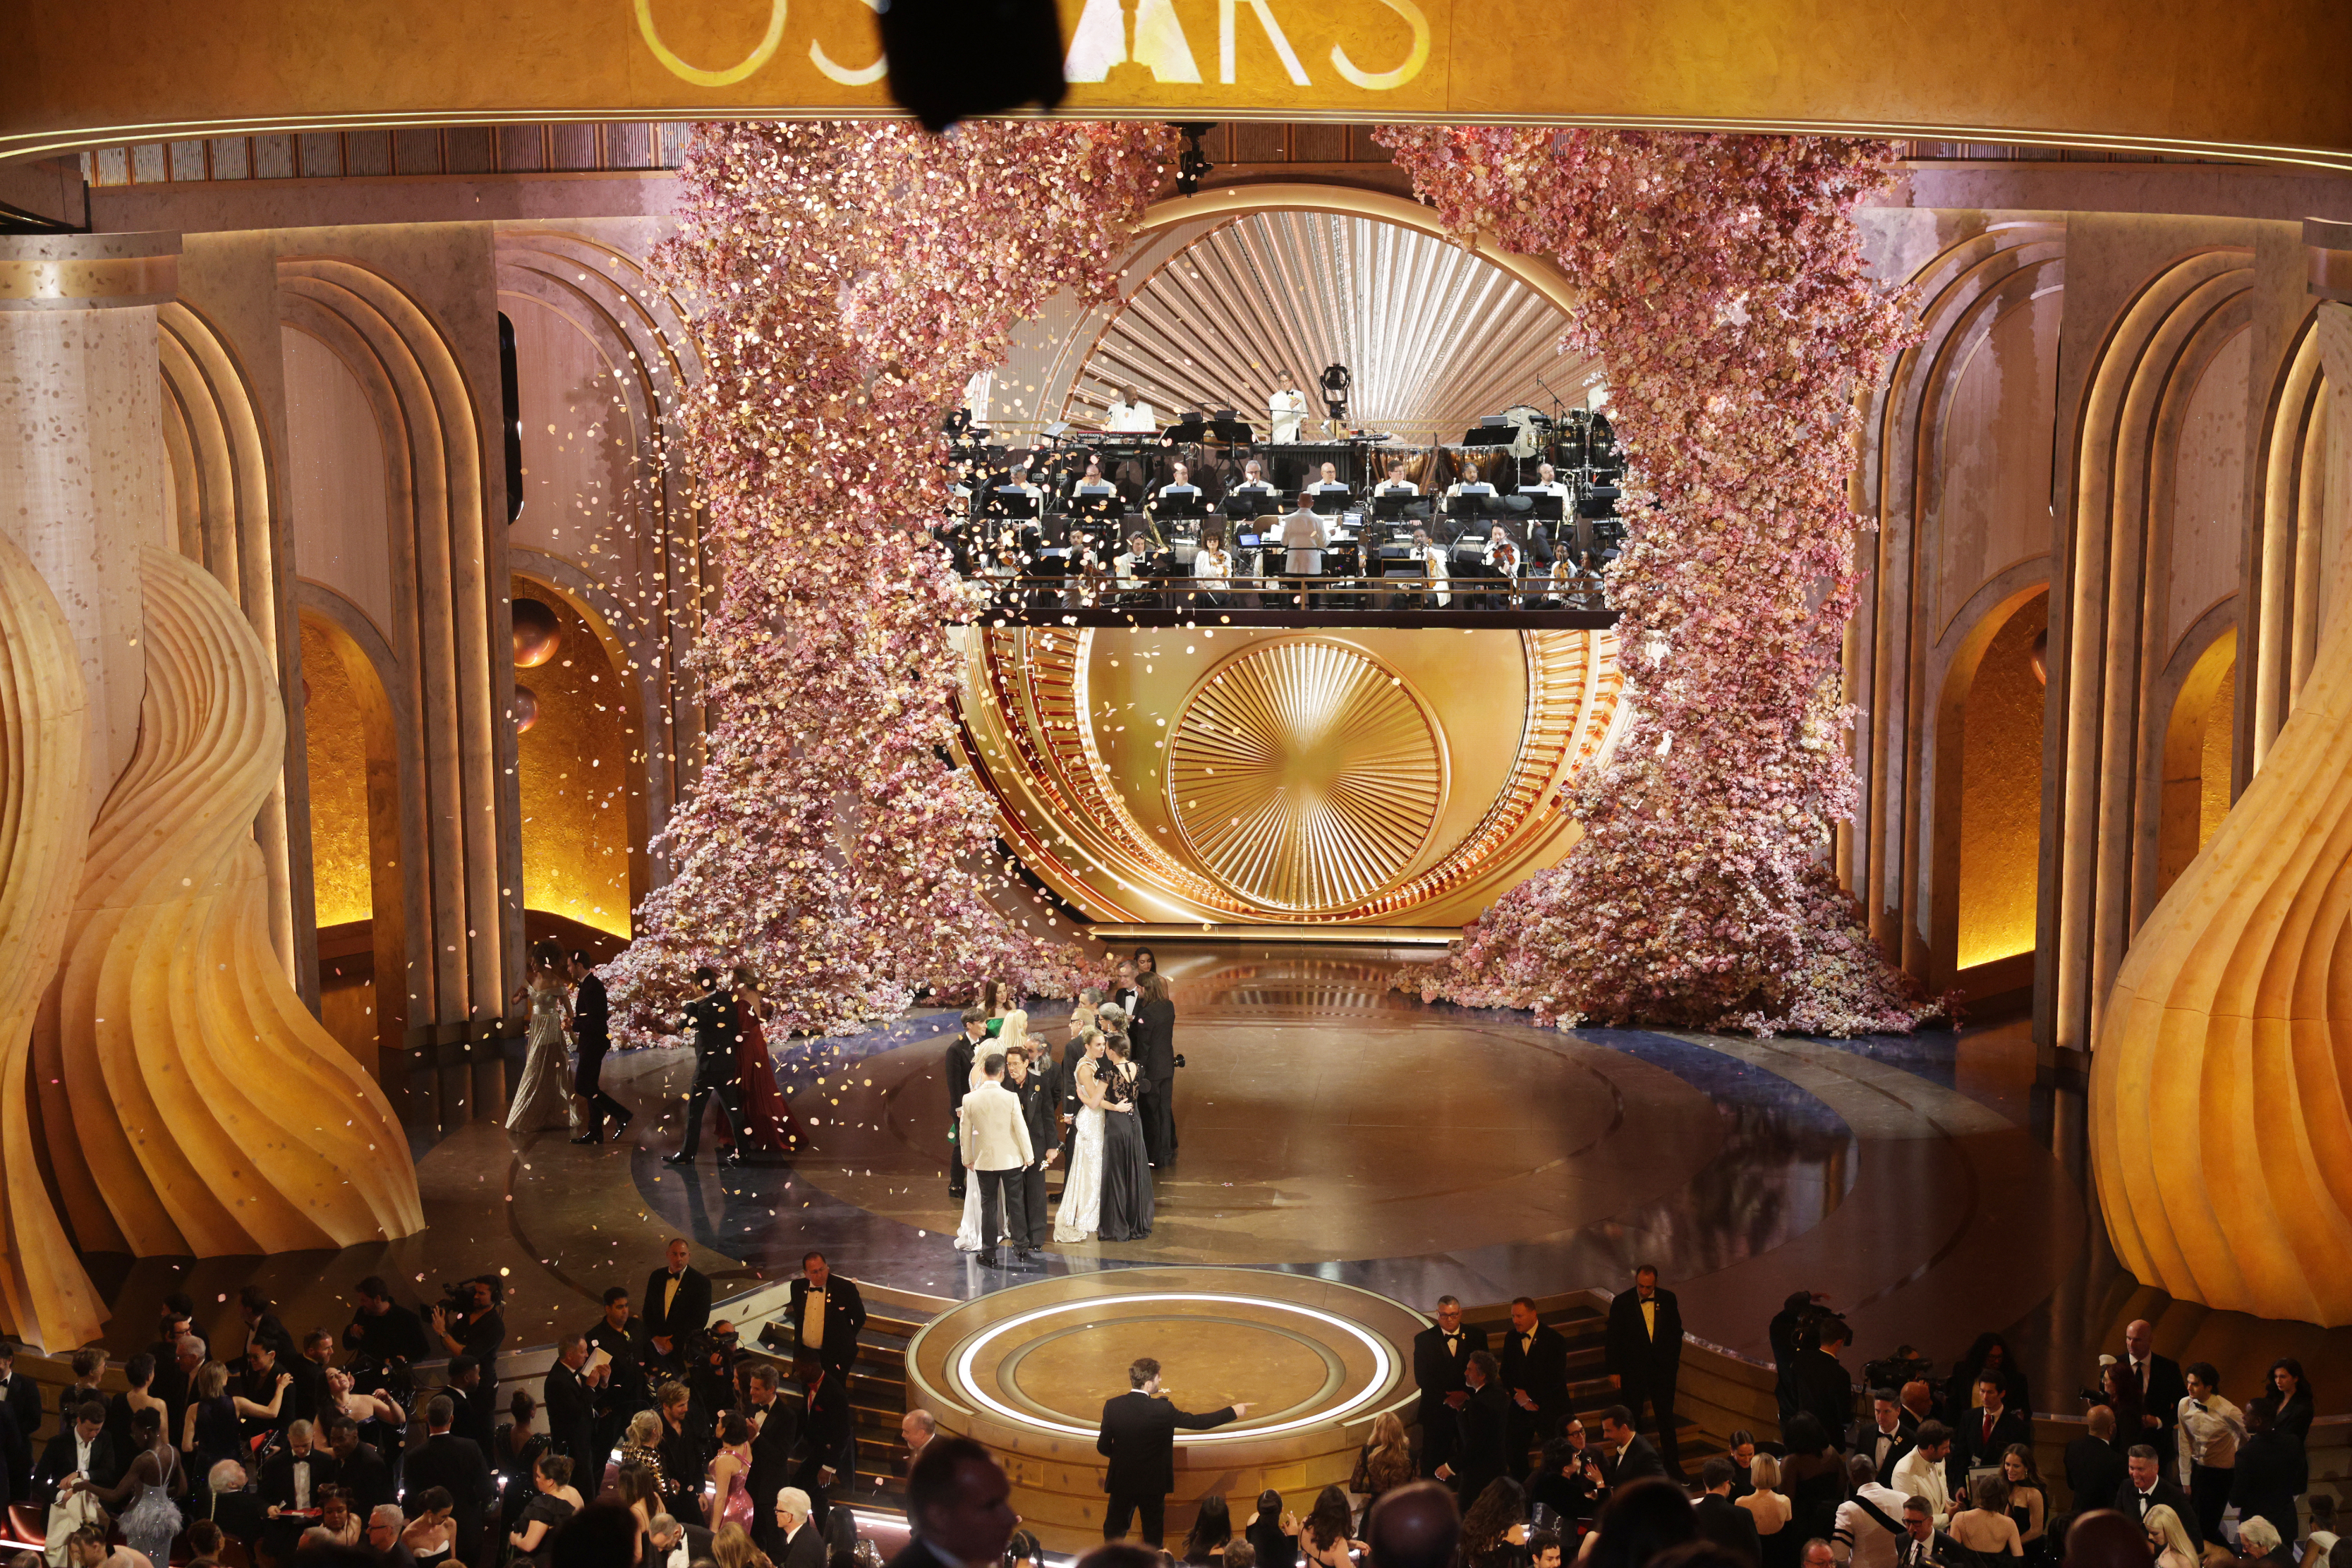 Elegant stage at Oscars with hosts speaking and orchestra above; audience in formal attire